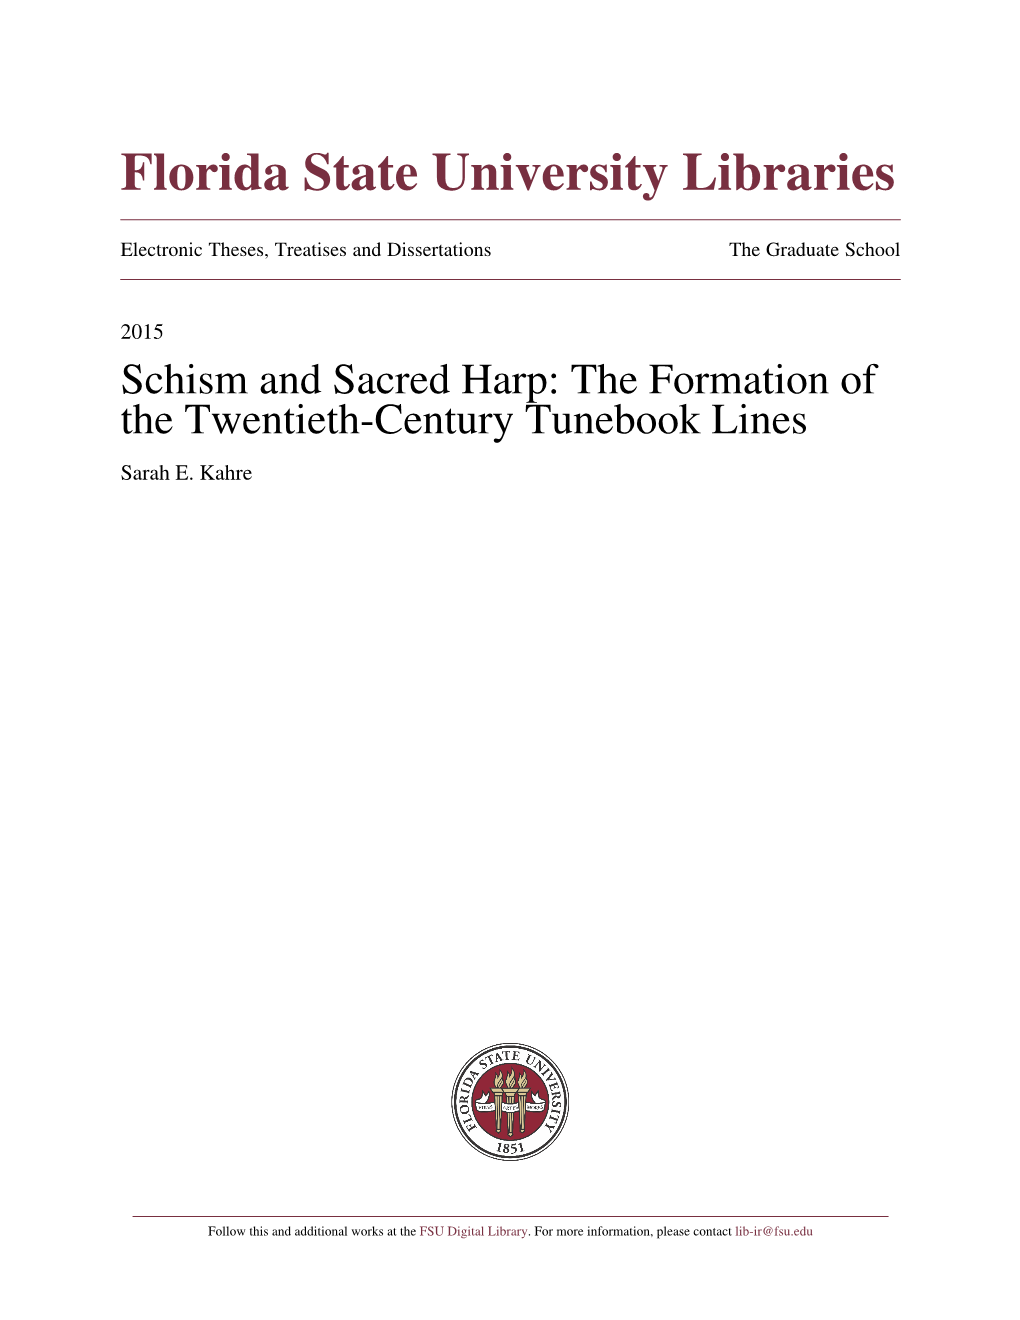 Schism and Sacred Harp: the Formation of the Twentieth-Century Tunebook Lines Sarah E